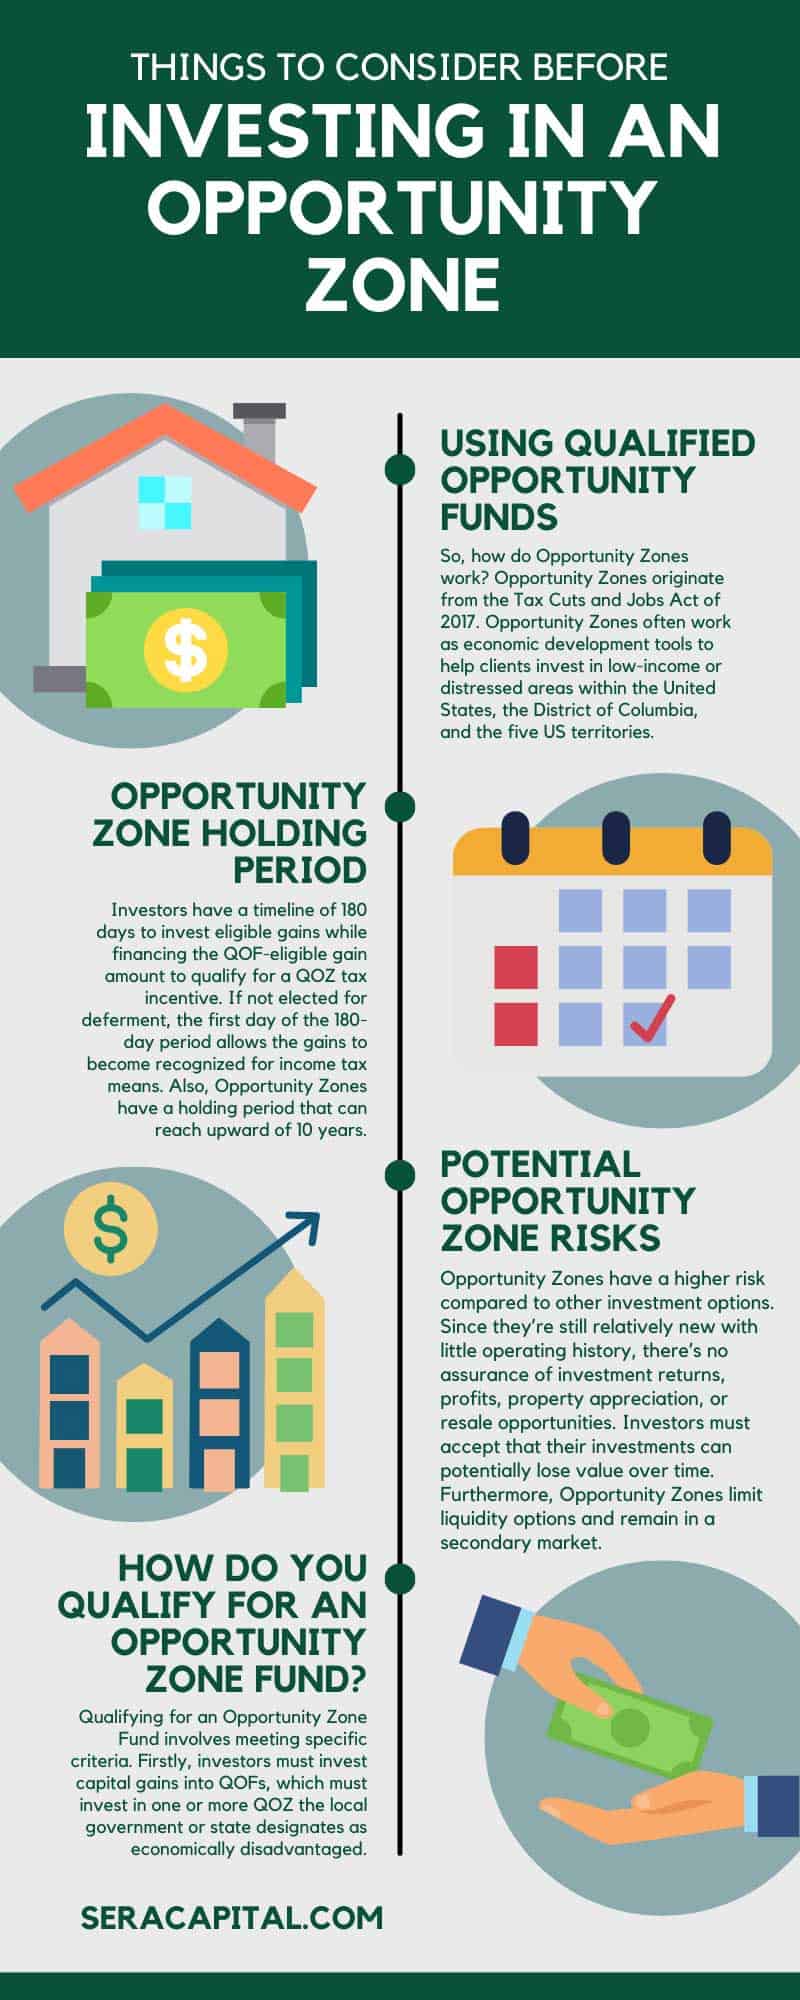 Things To Consider Before Investing in an Opportunity Zone